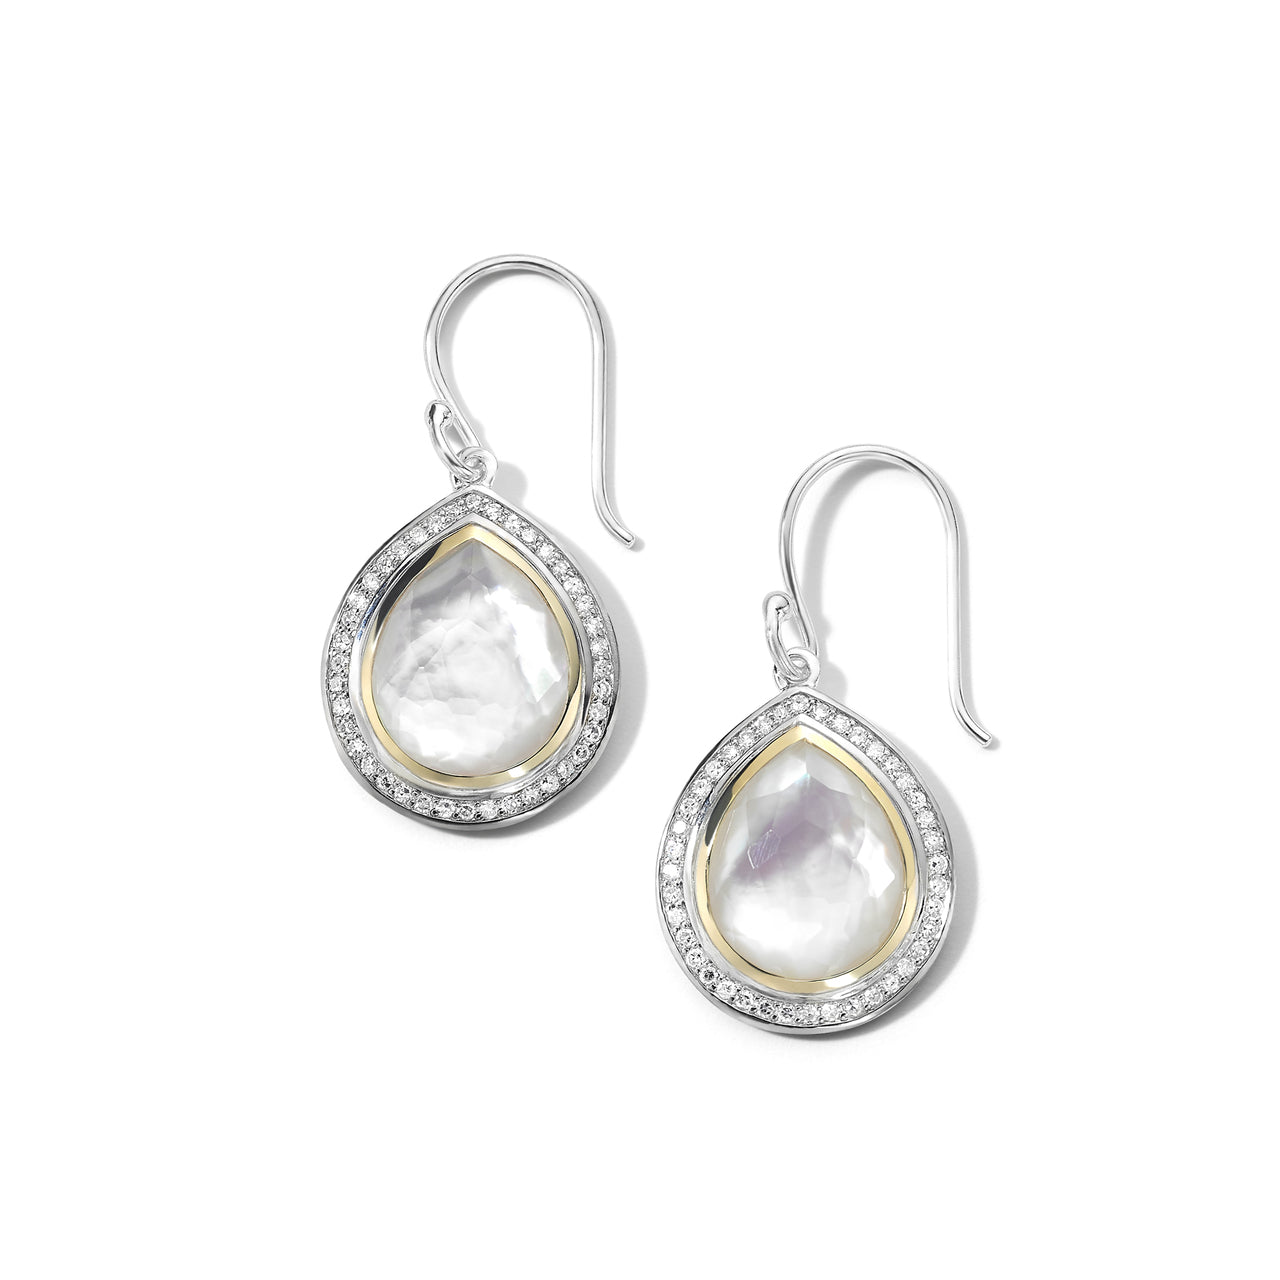 IPPOLITA Sterling Silver and 18k Yellow Gold Mother of Pearl Teardrop Diamond Earrings